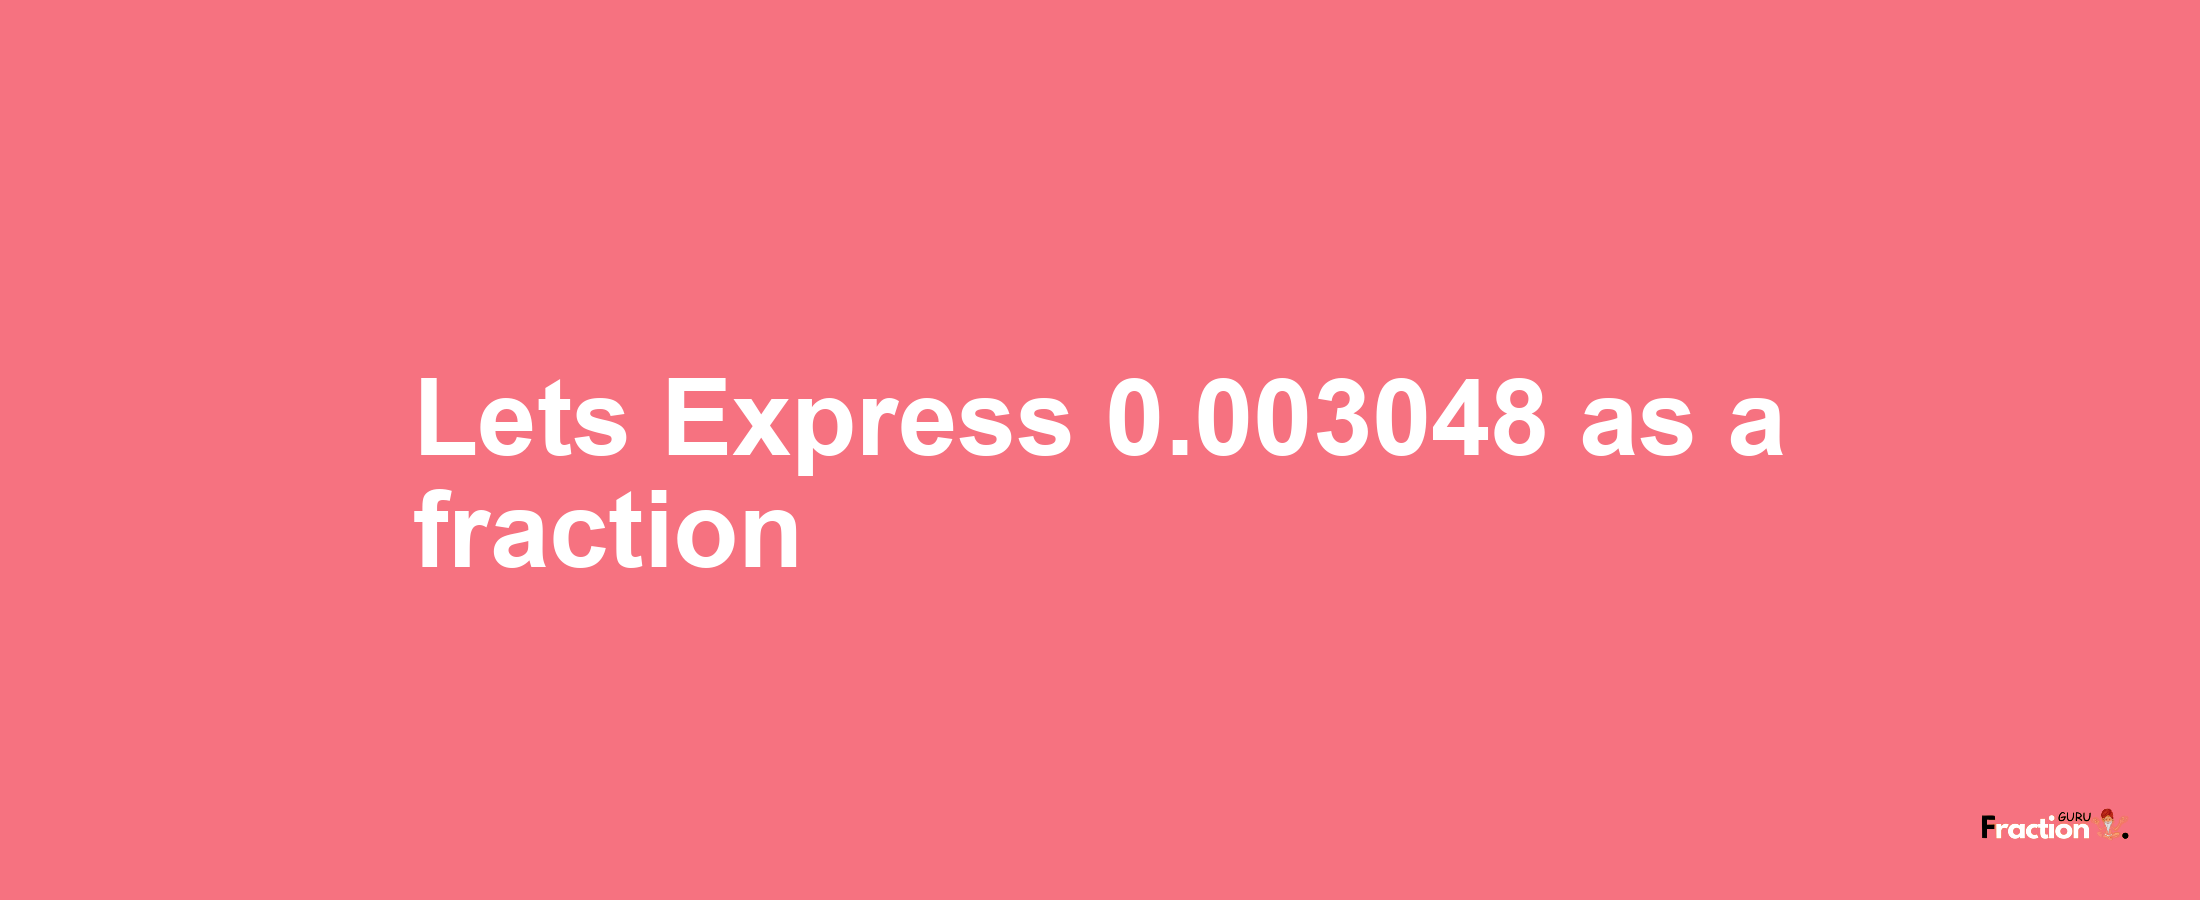 Lets Express 0.003048 as afraction